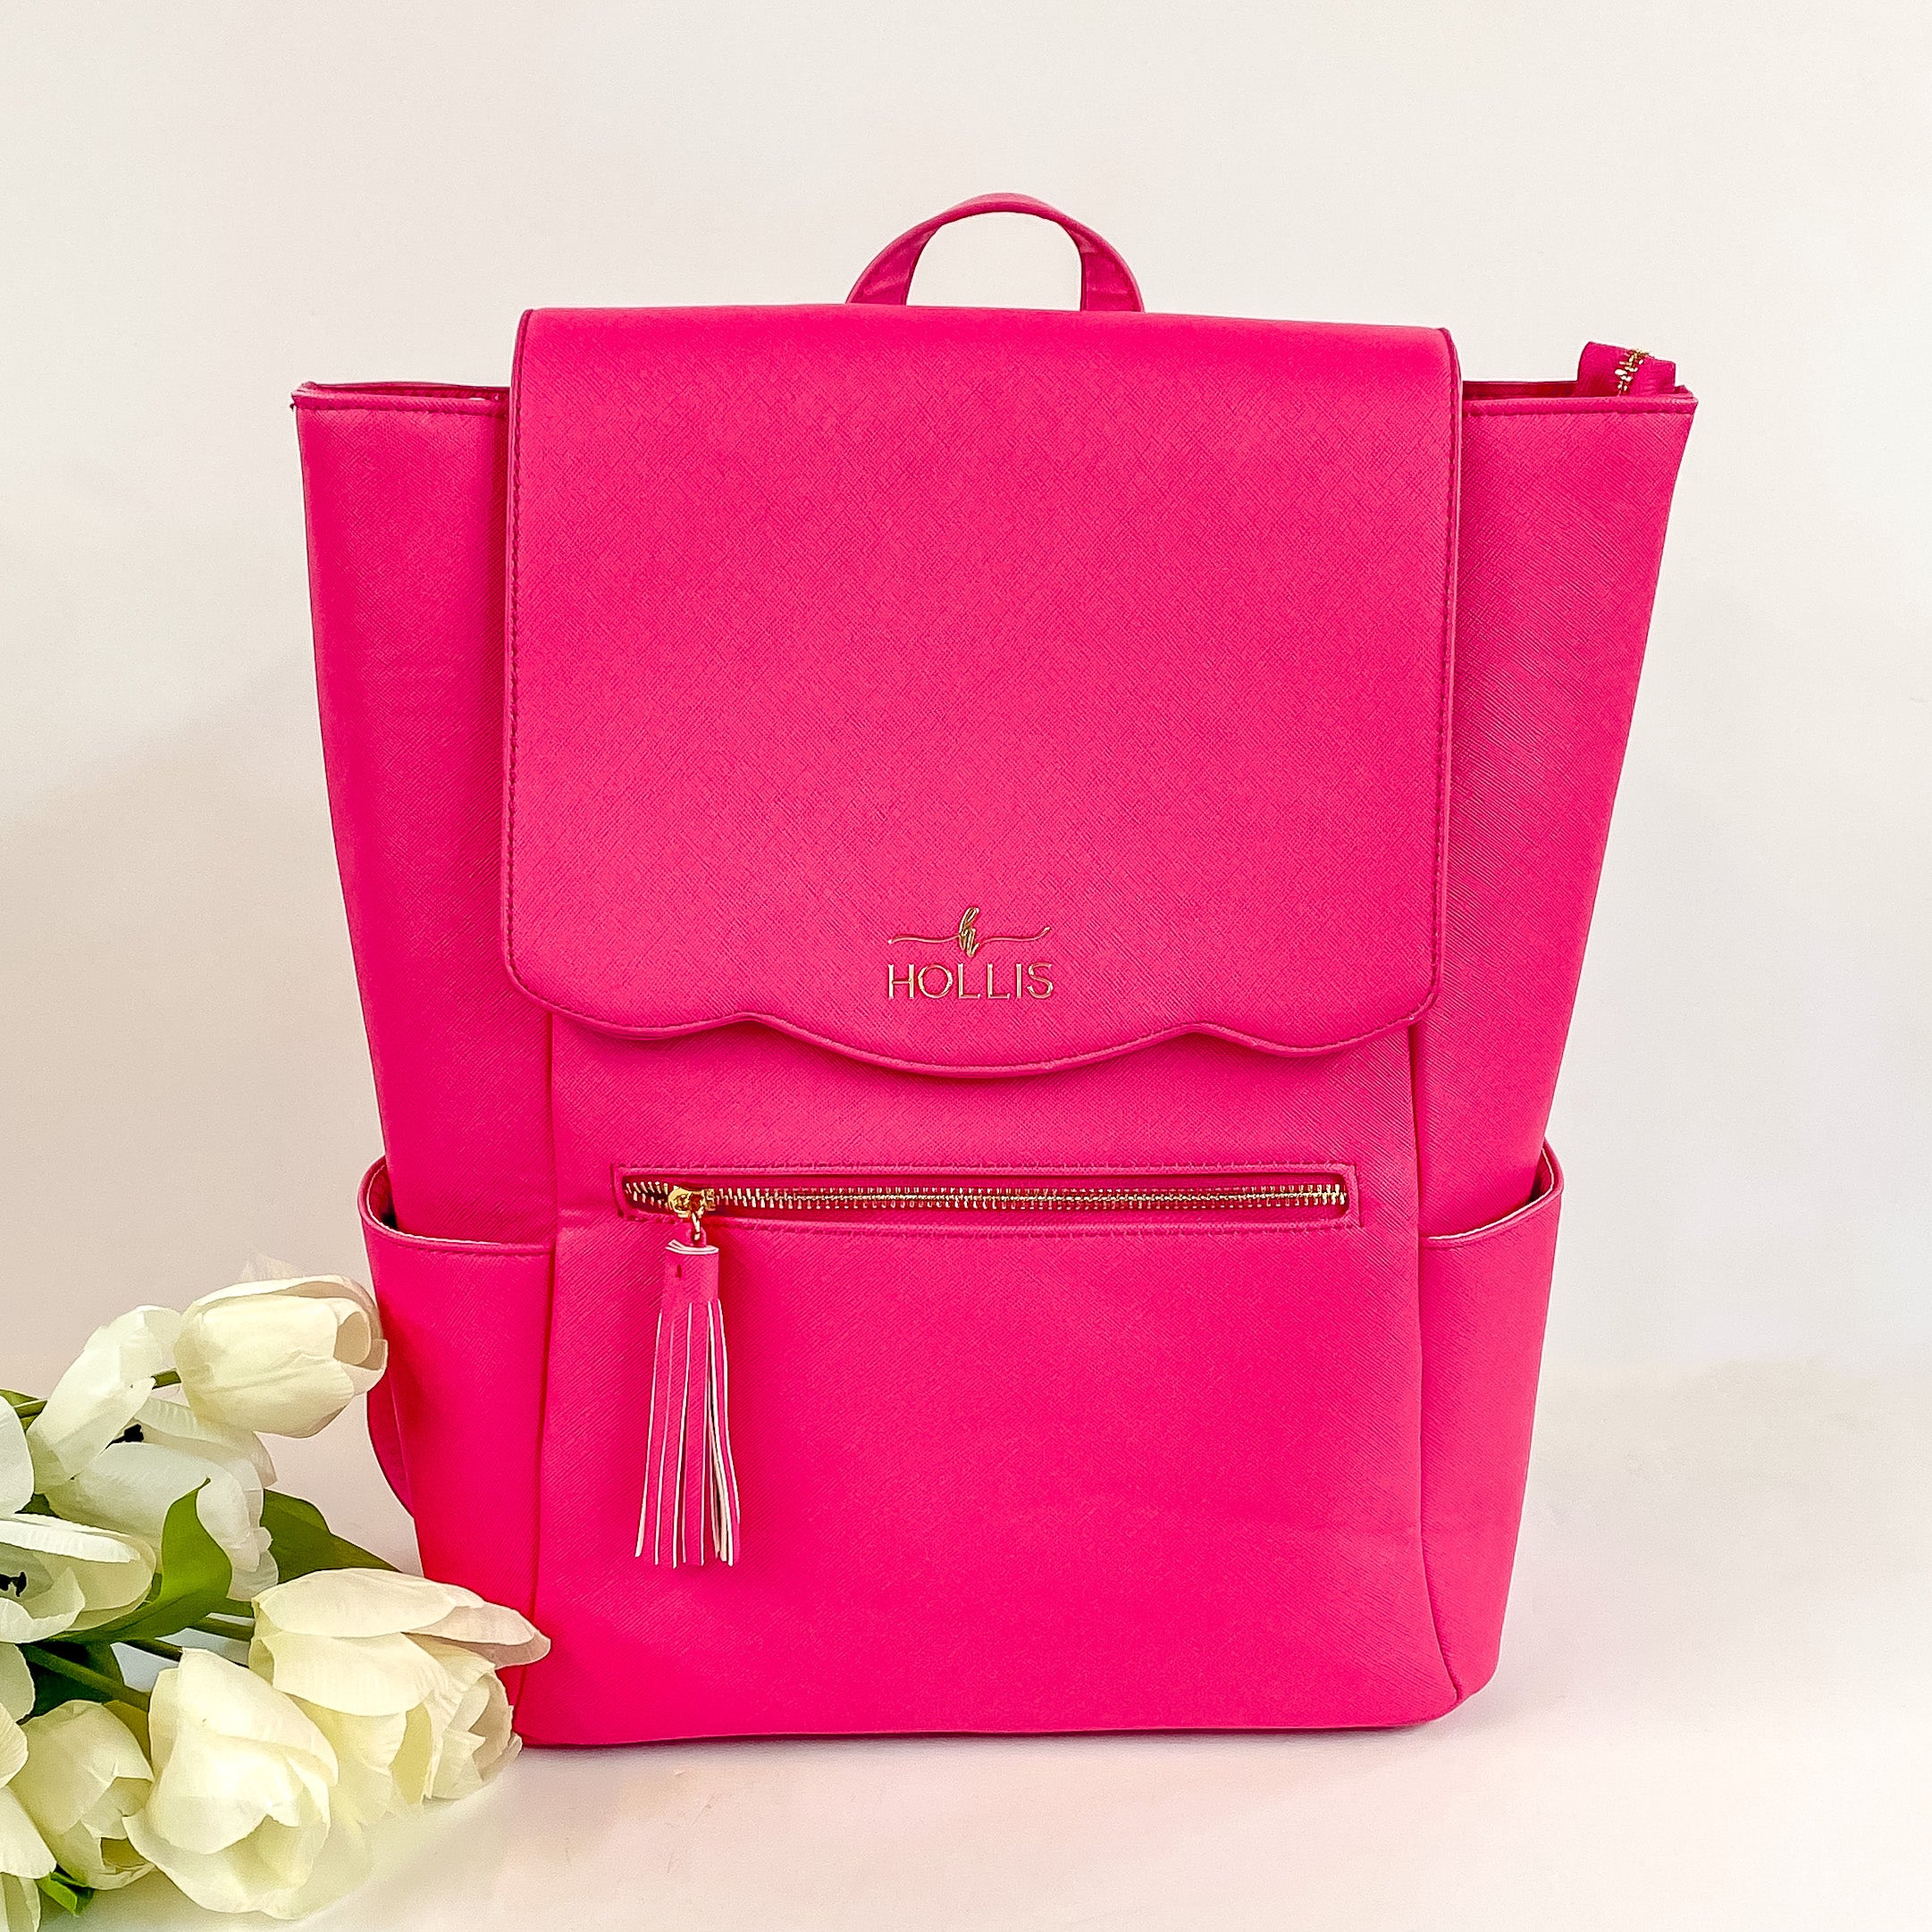 Hollis brand full size backpack in a hot pink color. Has a gold zipper and tassel on the zipper. Pictured on a white background.